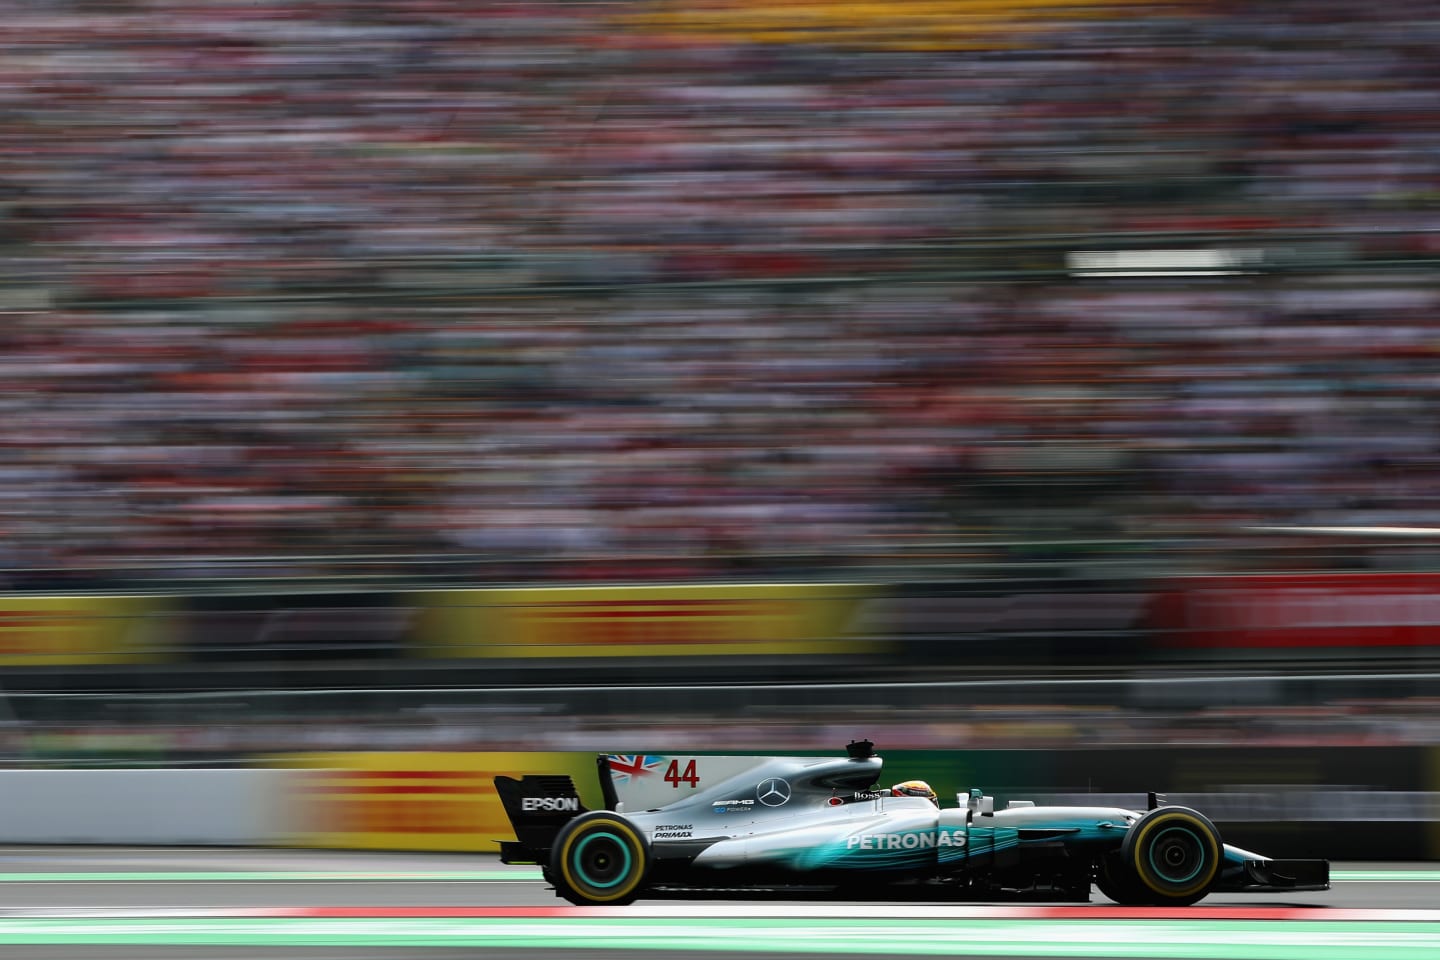 2017: After Rosberg's unexpected retirement, Hamilton would come back in the W08 alongside Valtteri Bottas. The Briton would take the title with nine wins, and deliver Mercedes another double triumph. The livery was lightened once again, with the drivers' names and numbers displayed on the shark fin at the rear of the car.